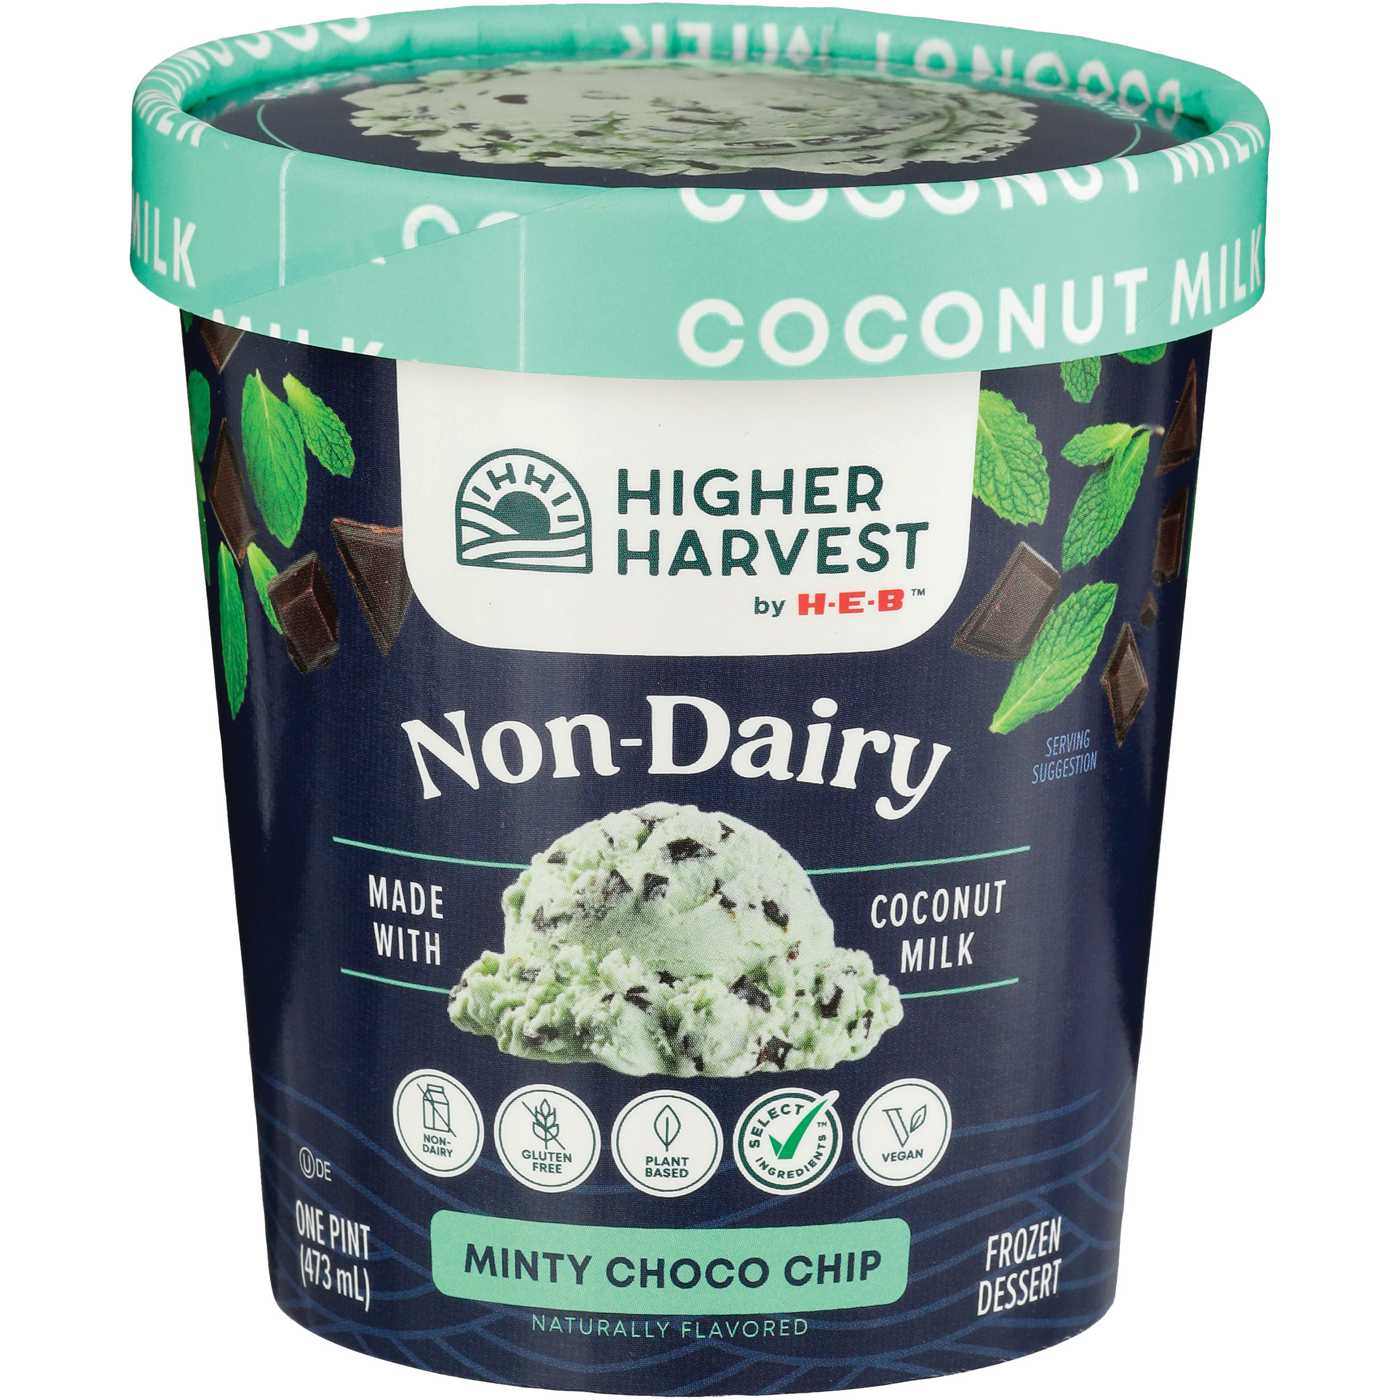 Higher Harvest by H-E-B Non-Dairy Frozen Dessert - Minty Choco Chip; image 1 of 2